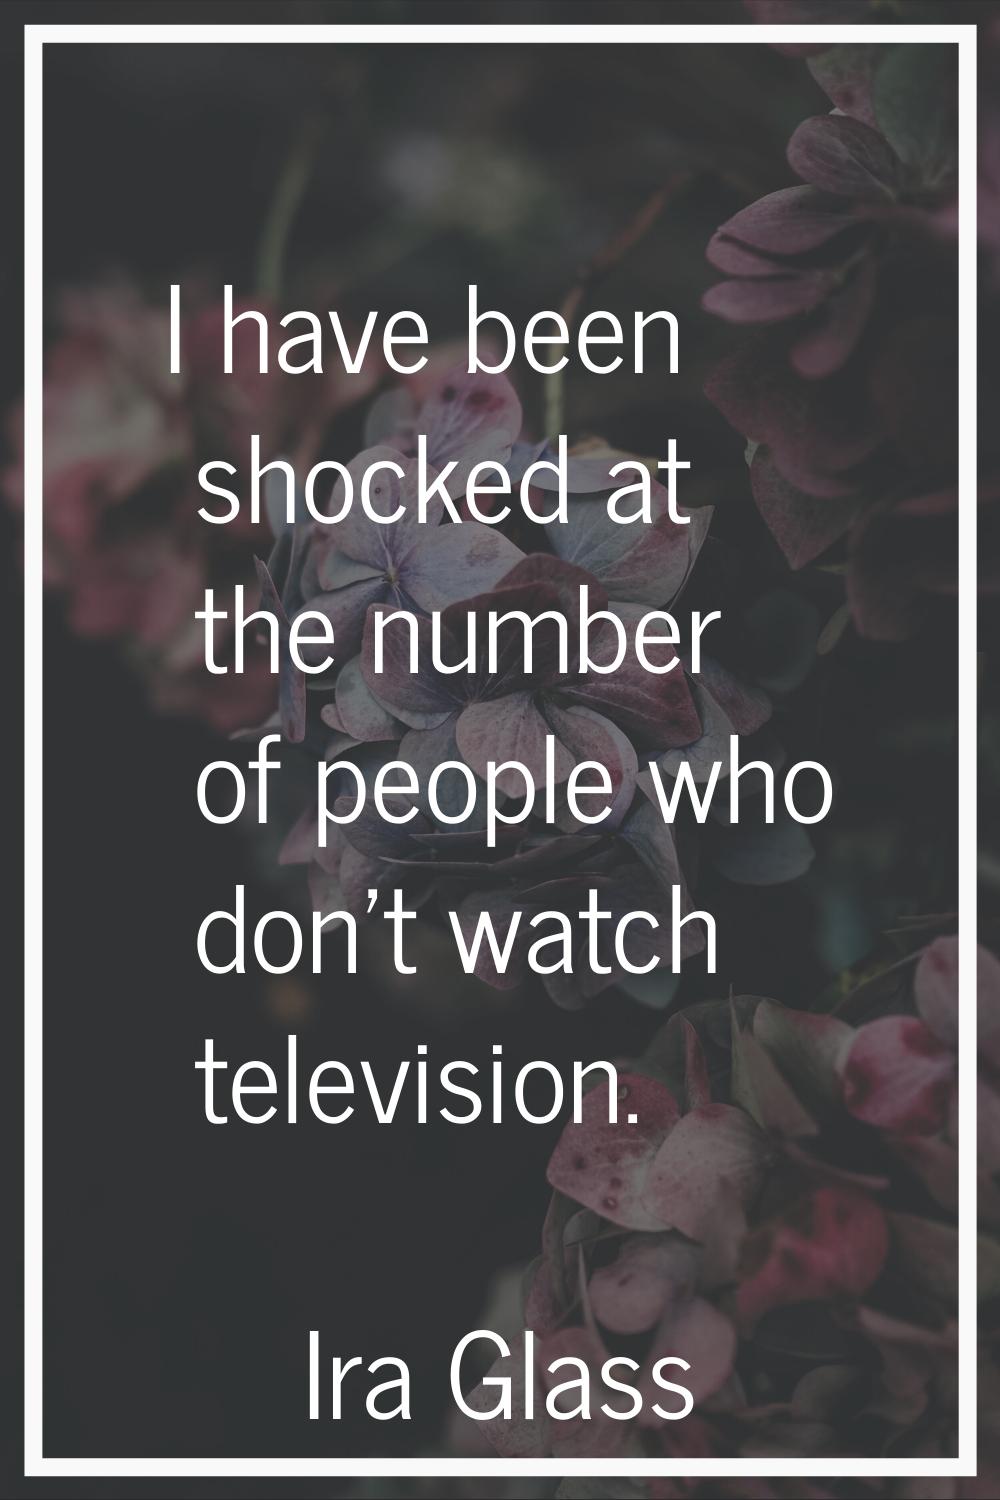 I have been shocked at the number of people who don't watch television.